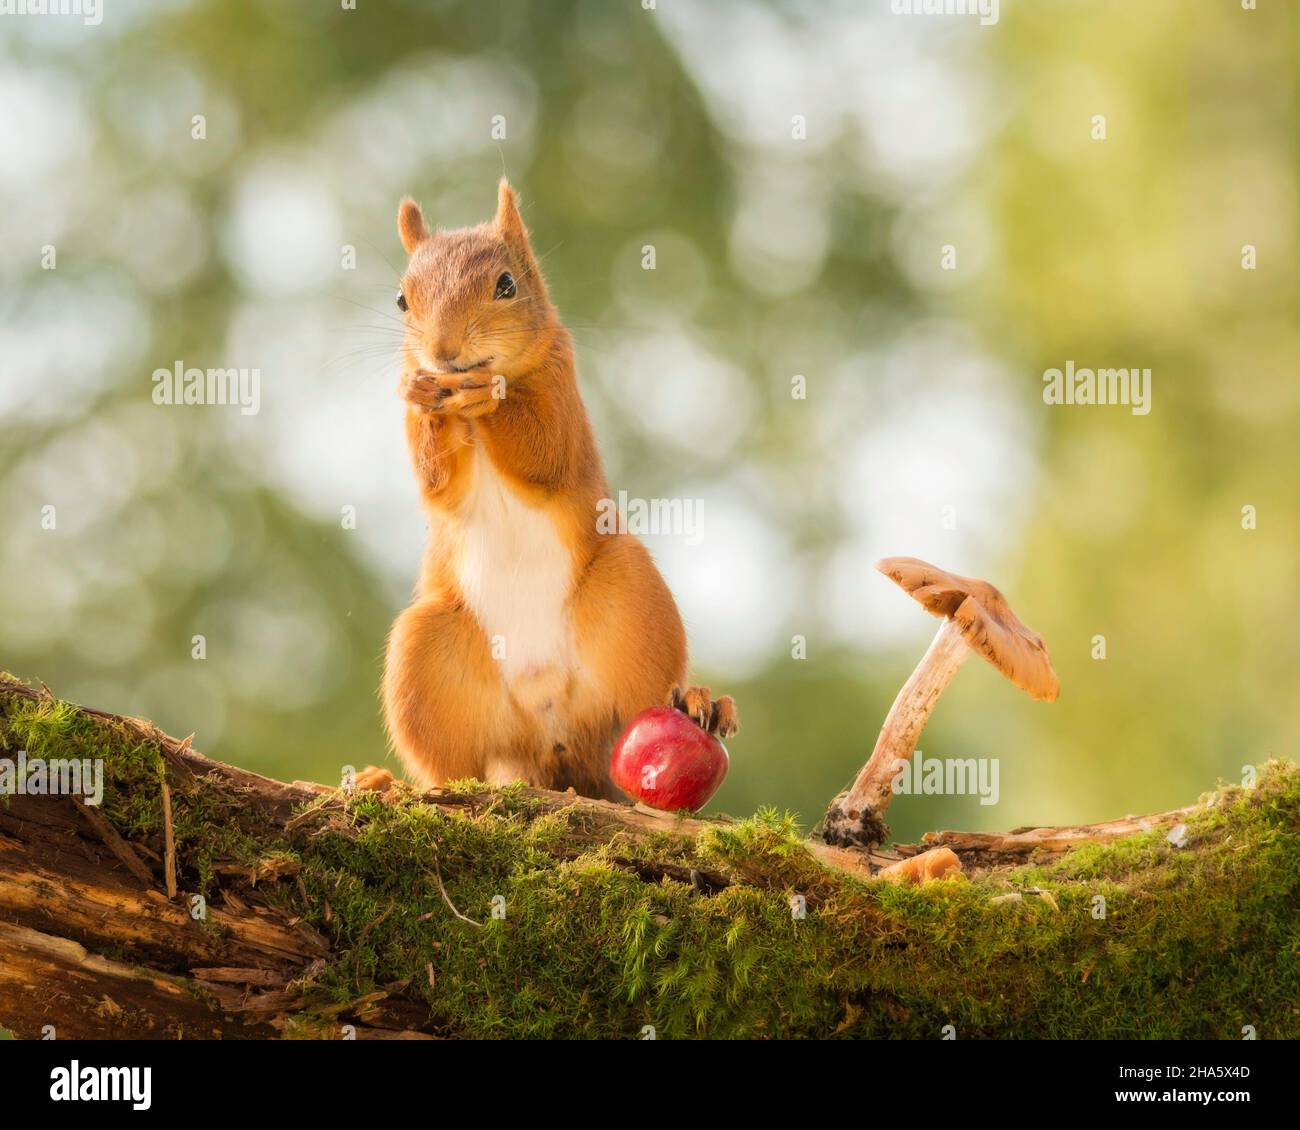 red squirrel standing with one feet on apple with mushroom beside Stock Photo